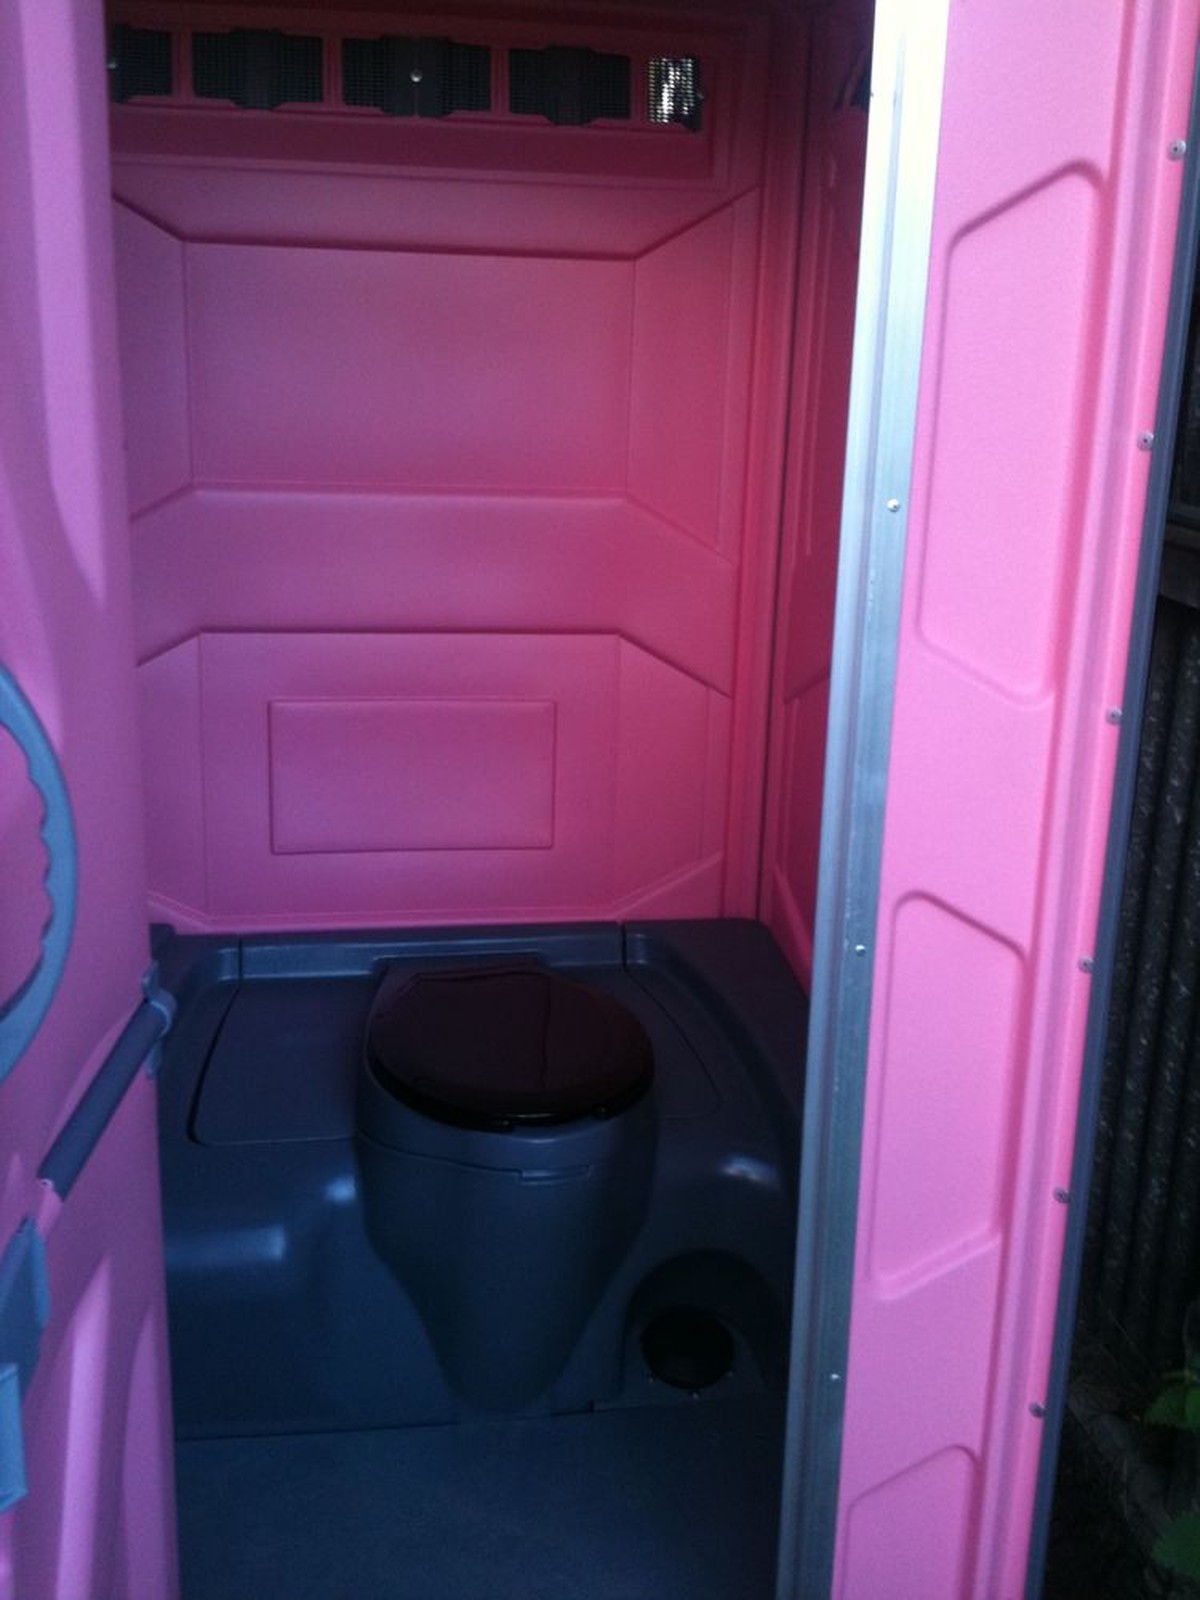 What are some portable toilets sold by PolyJohn?